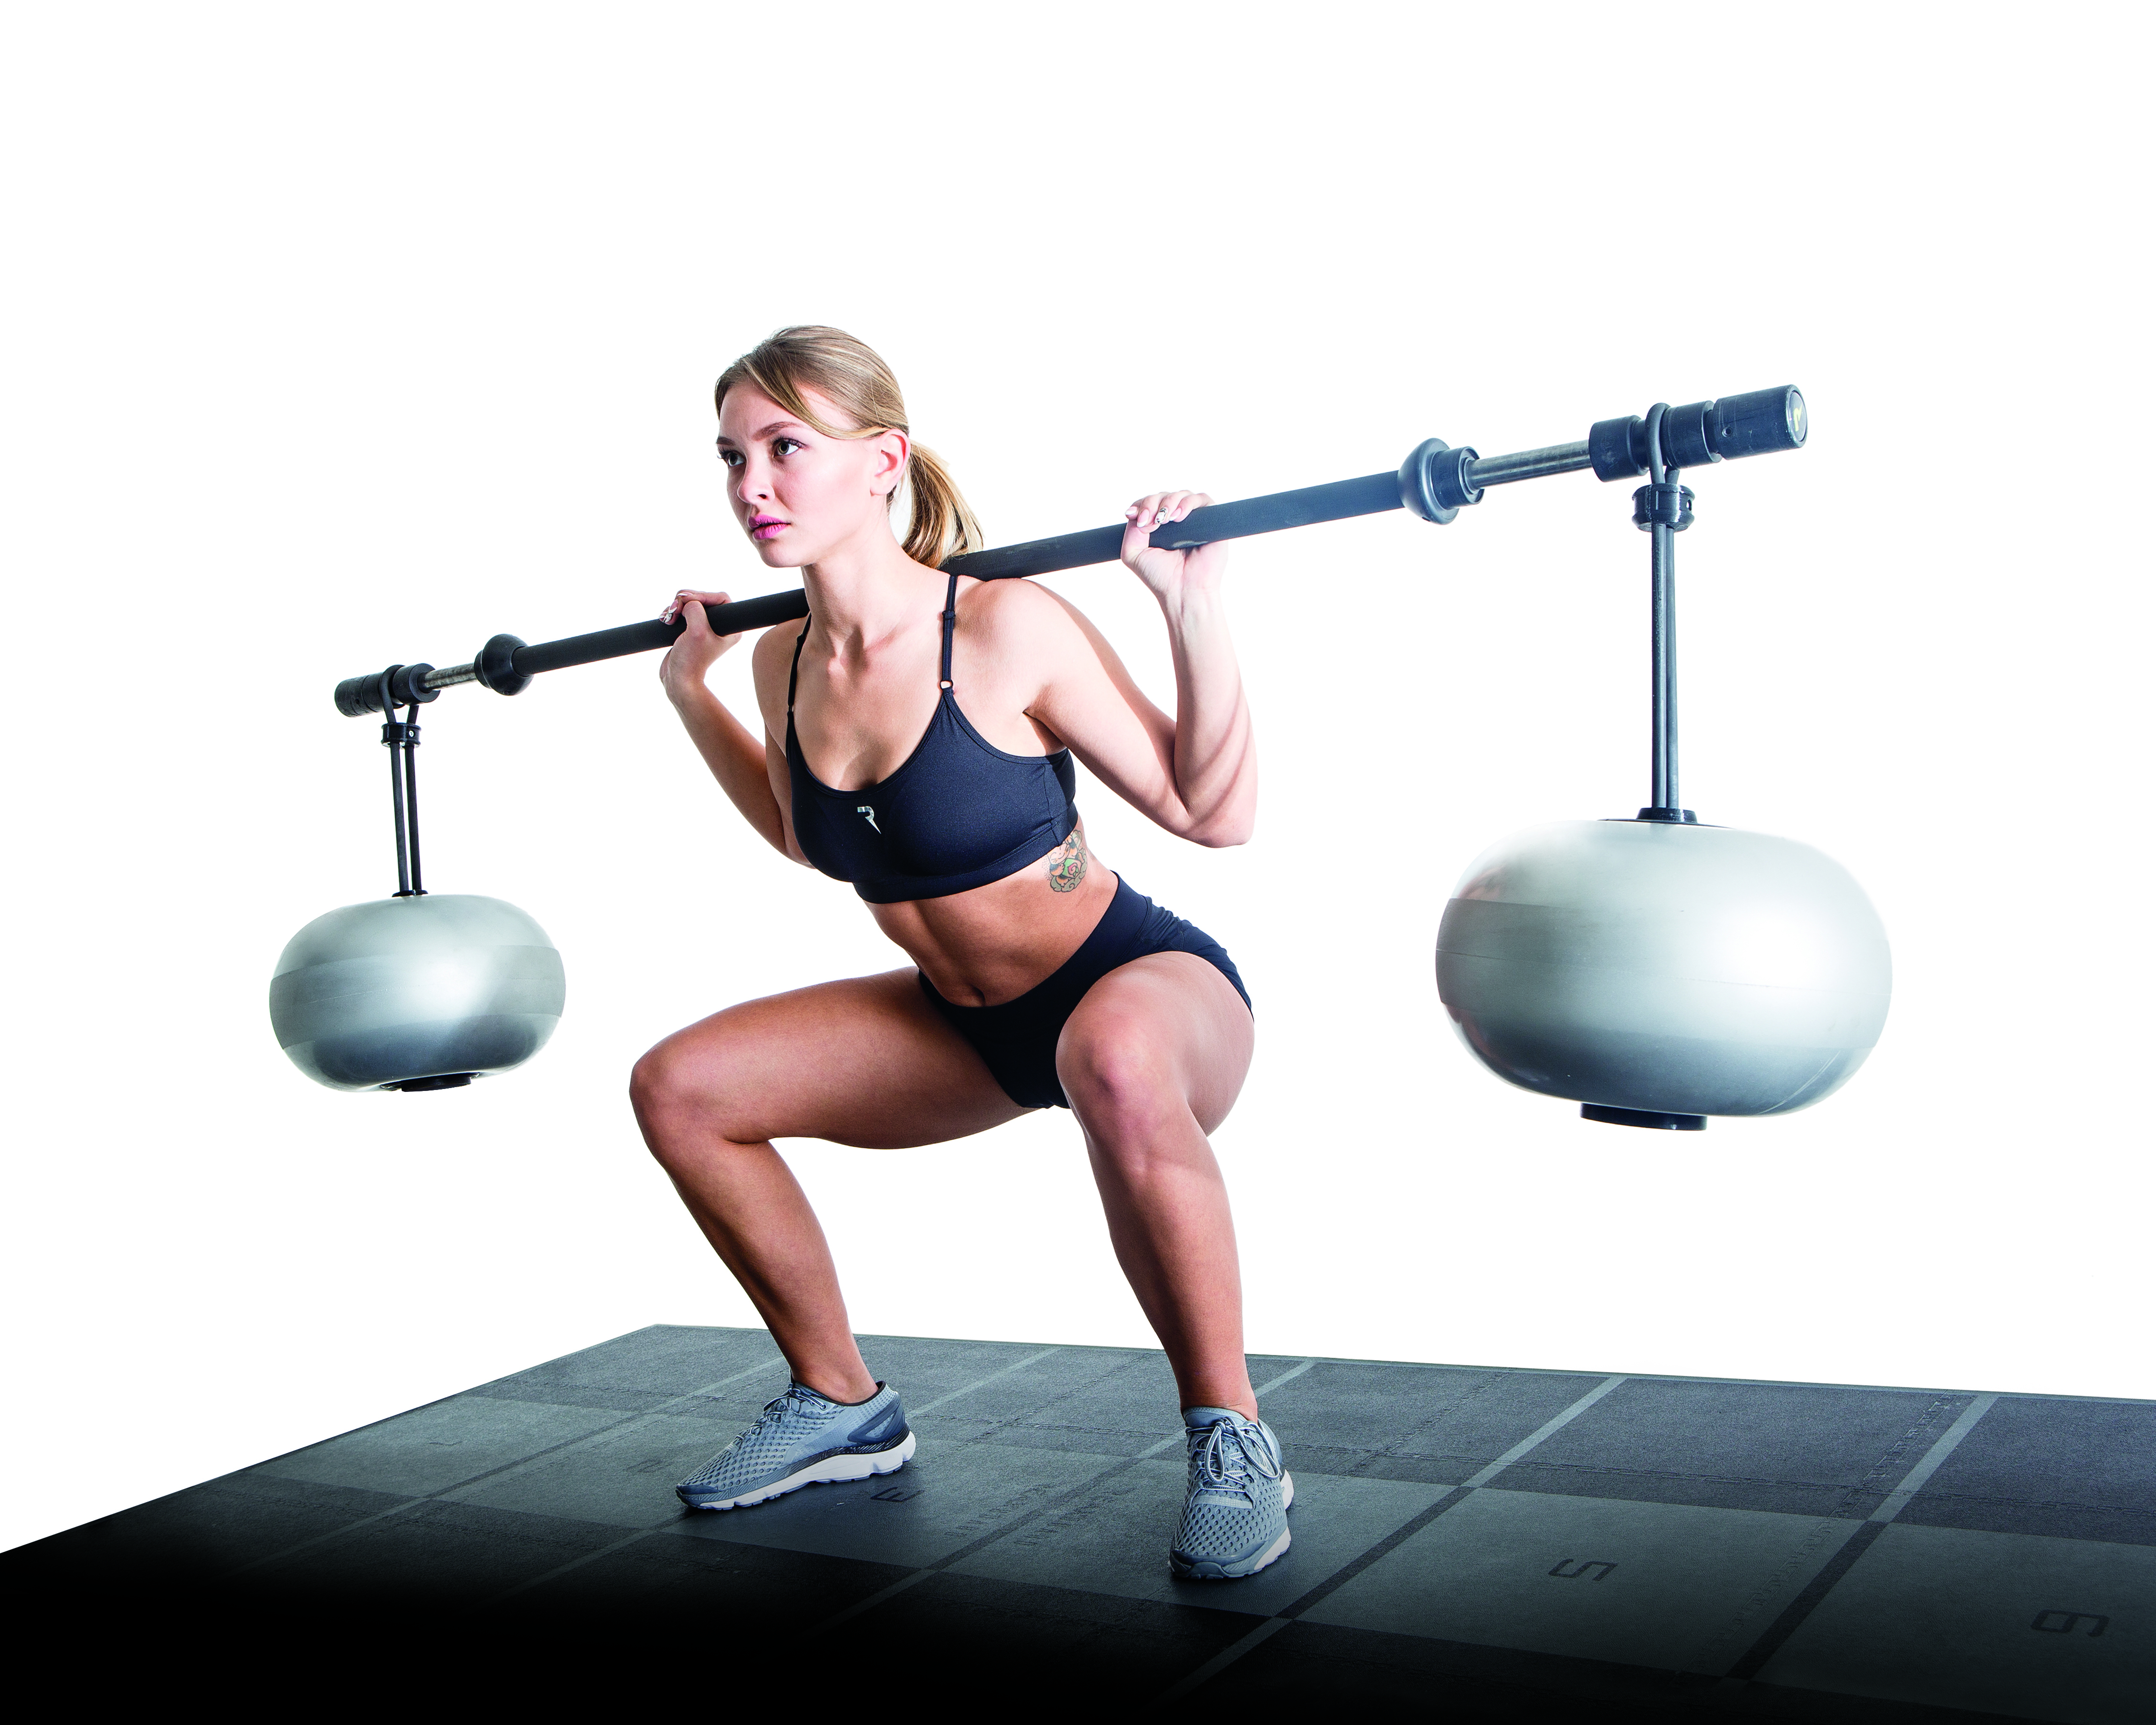 Reaxing launches Reax Lift barbell 